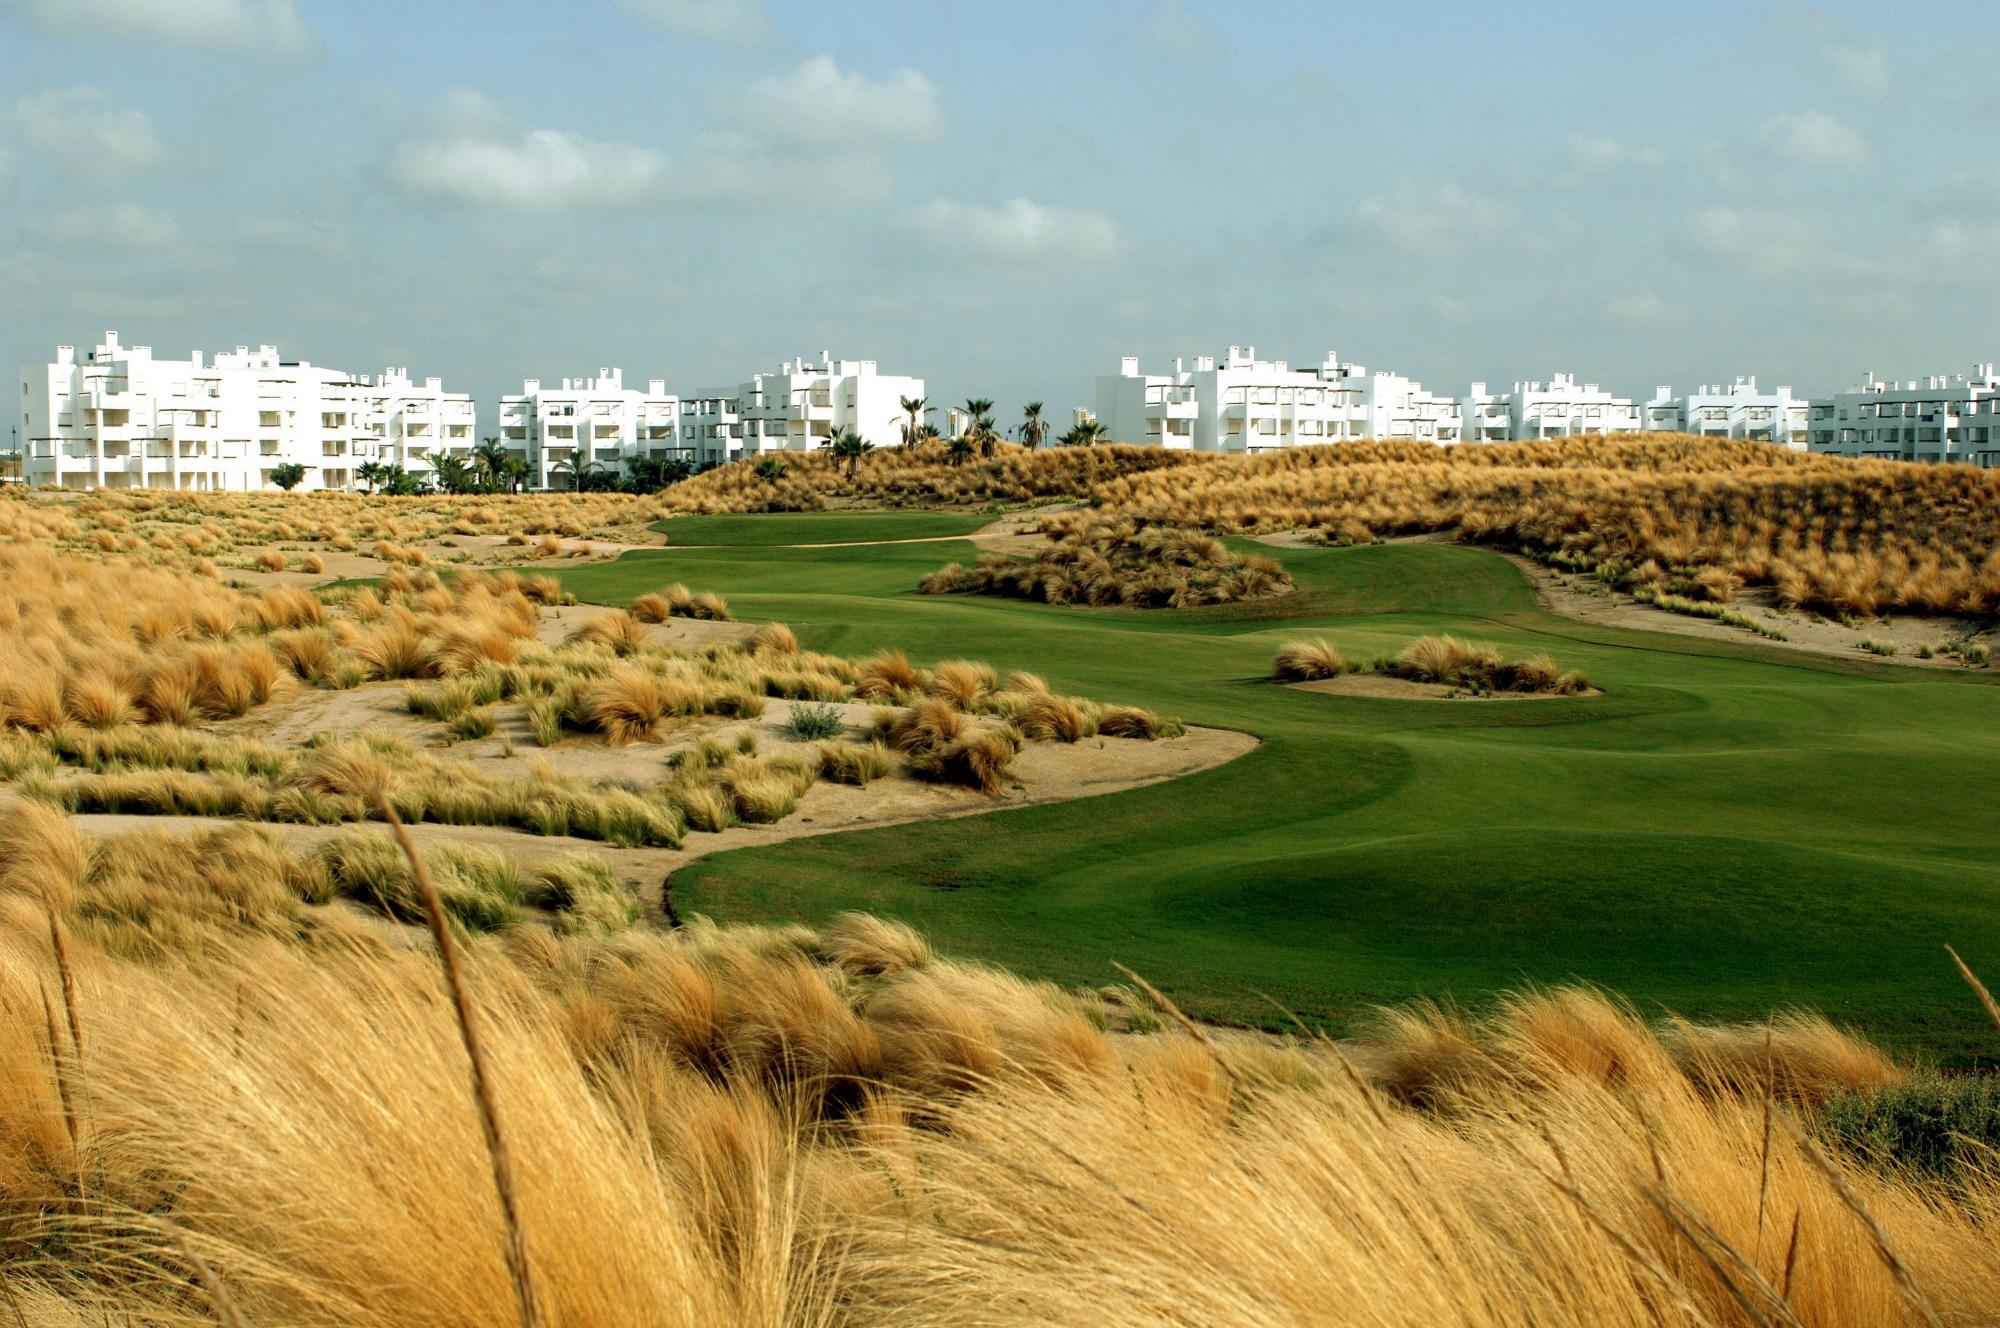 View Saurines de la Torre Golf Course 's impressive golf course situated in incredible Costa Blanca.